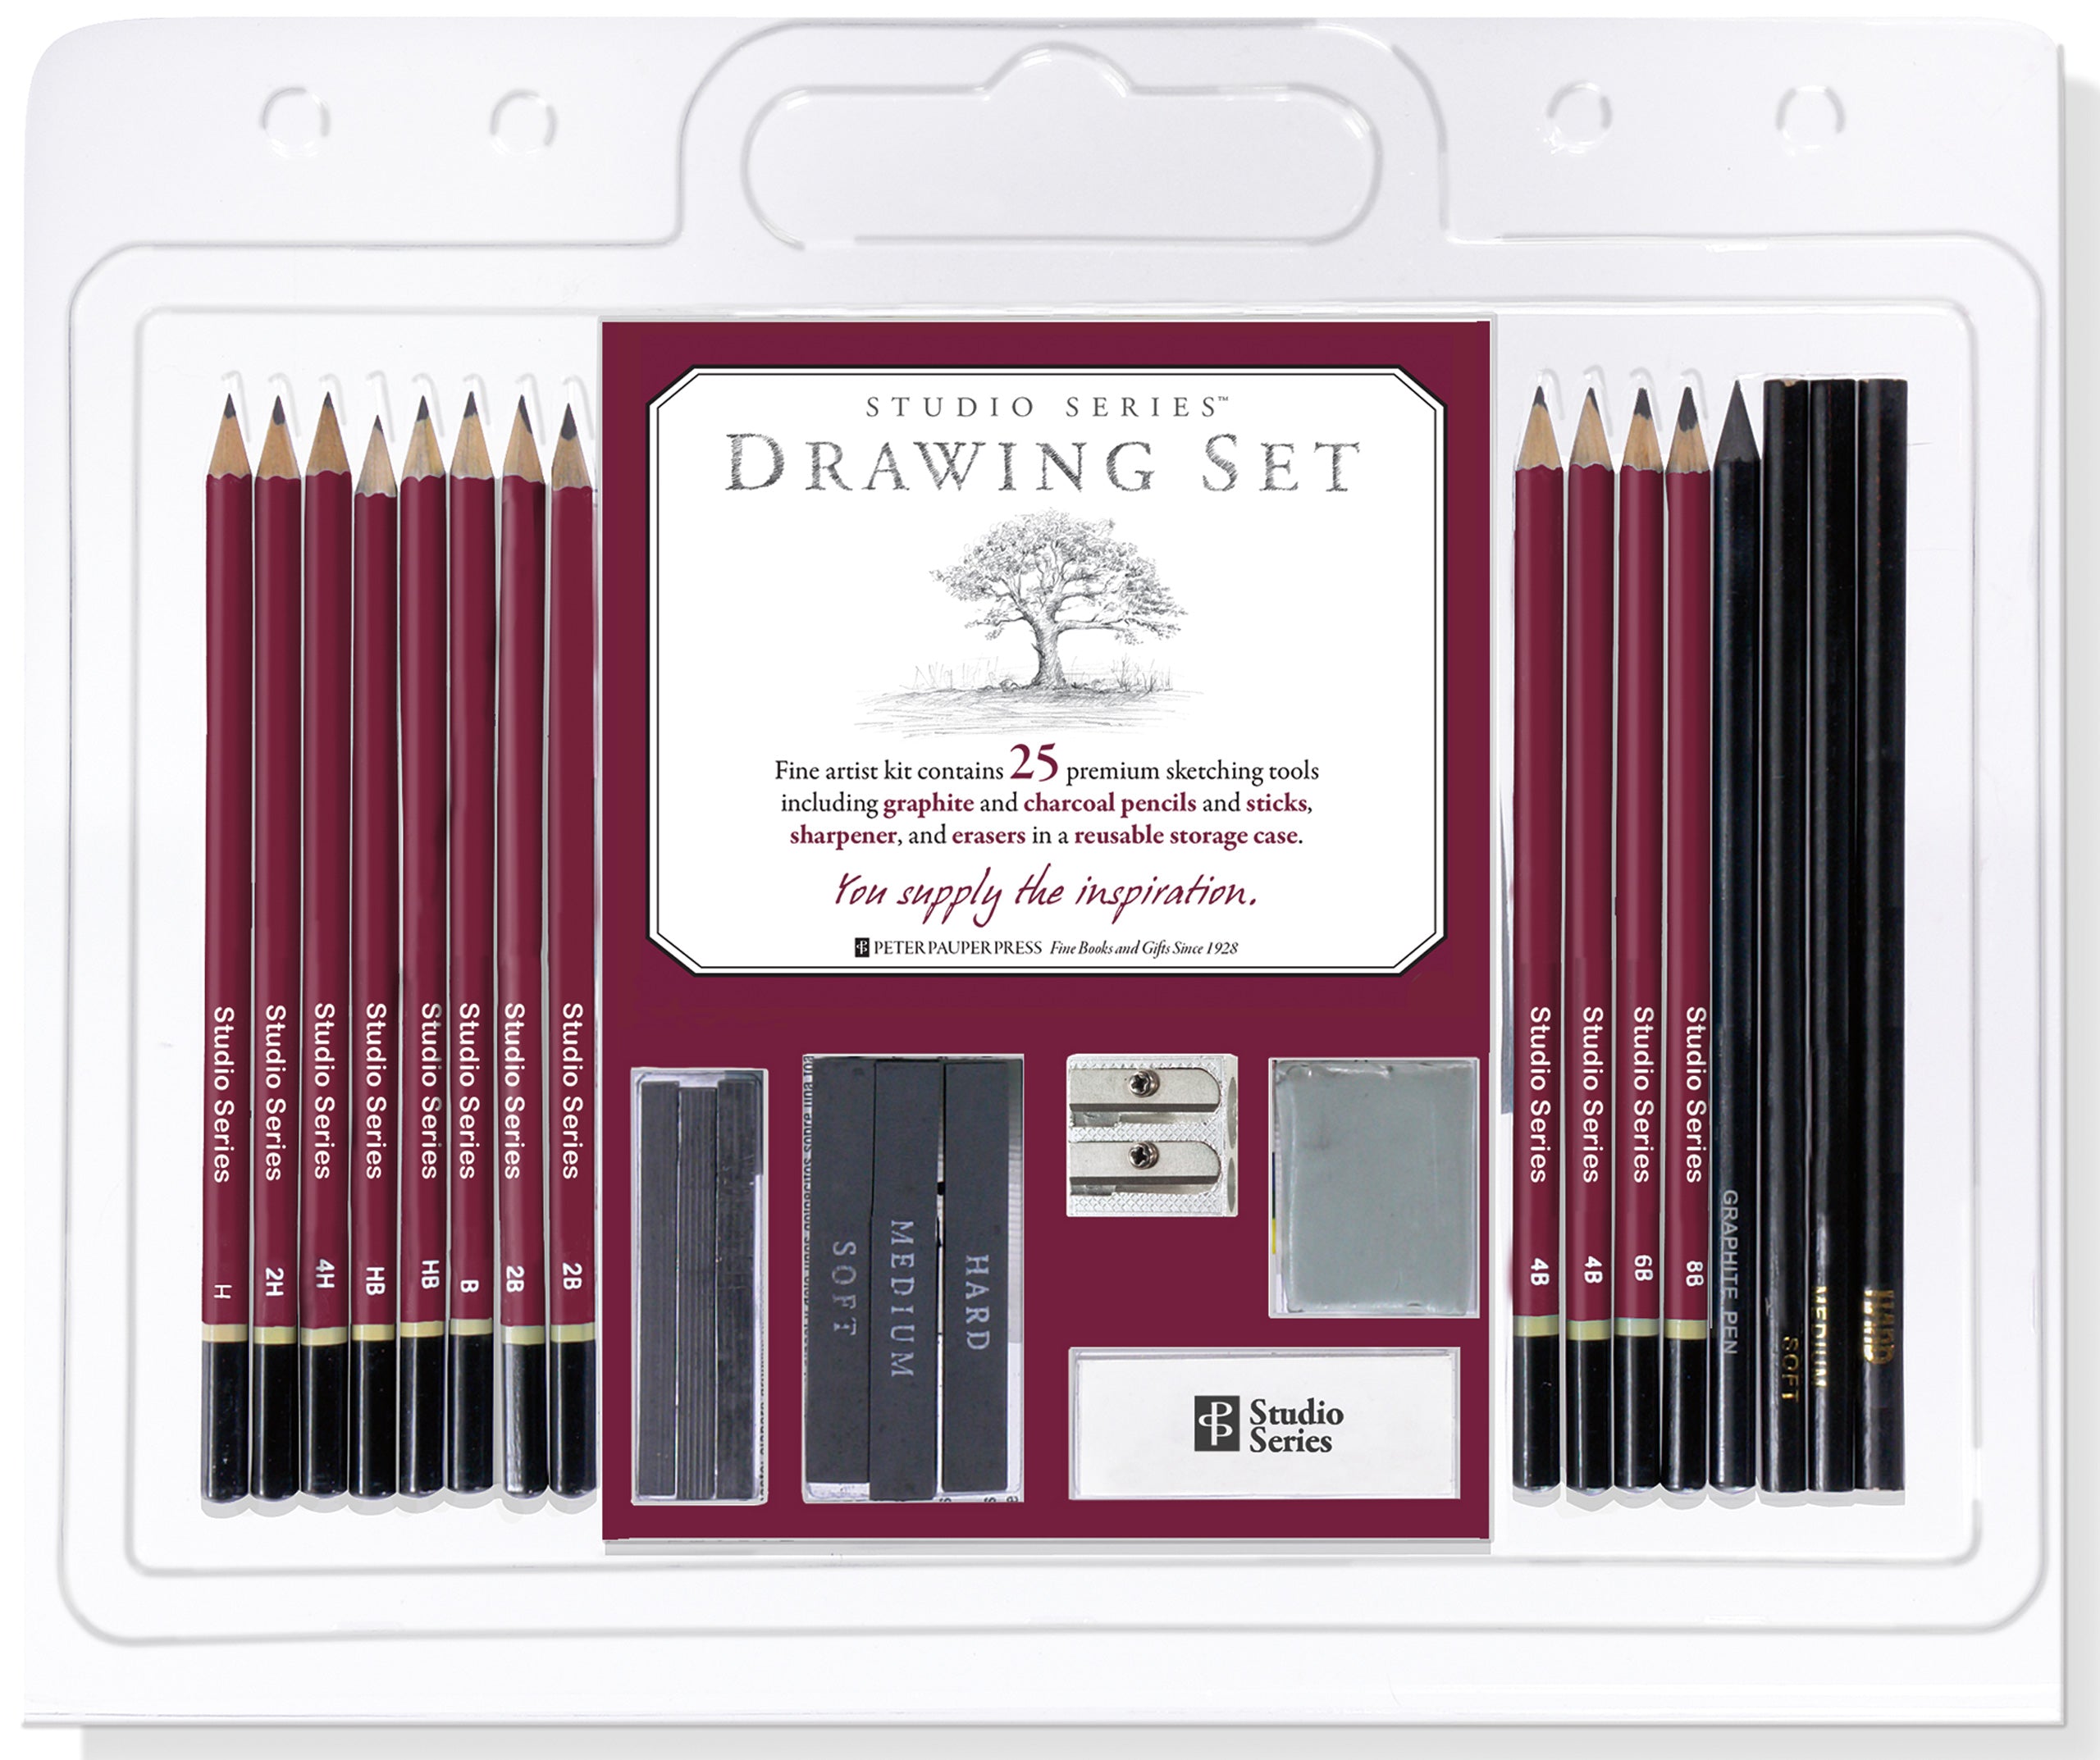 Sketch Drawing Kit Premium Graphite, Charcoal, Crayons and Drawing